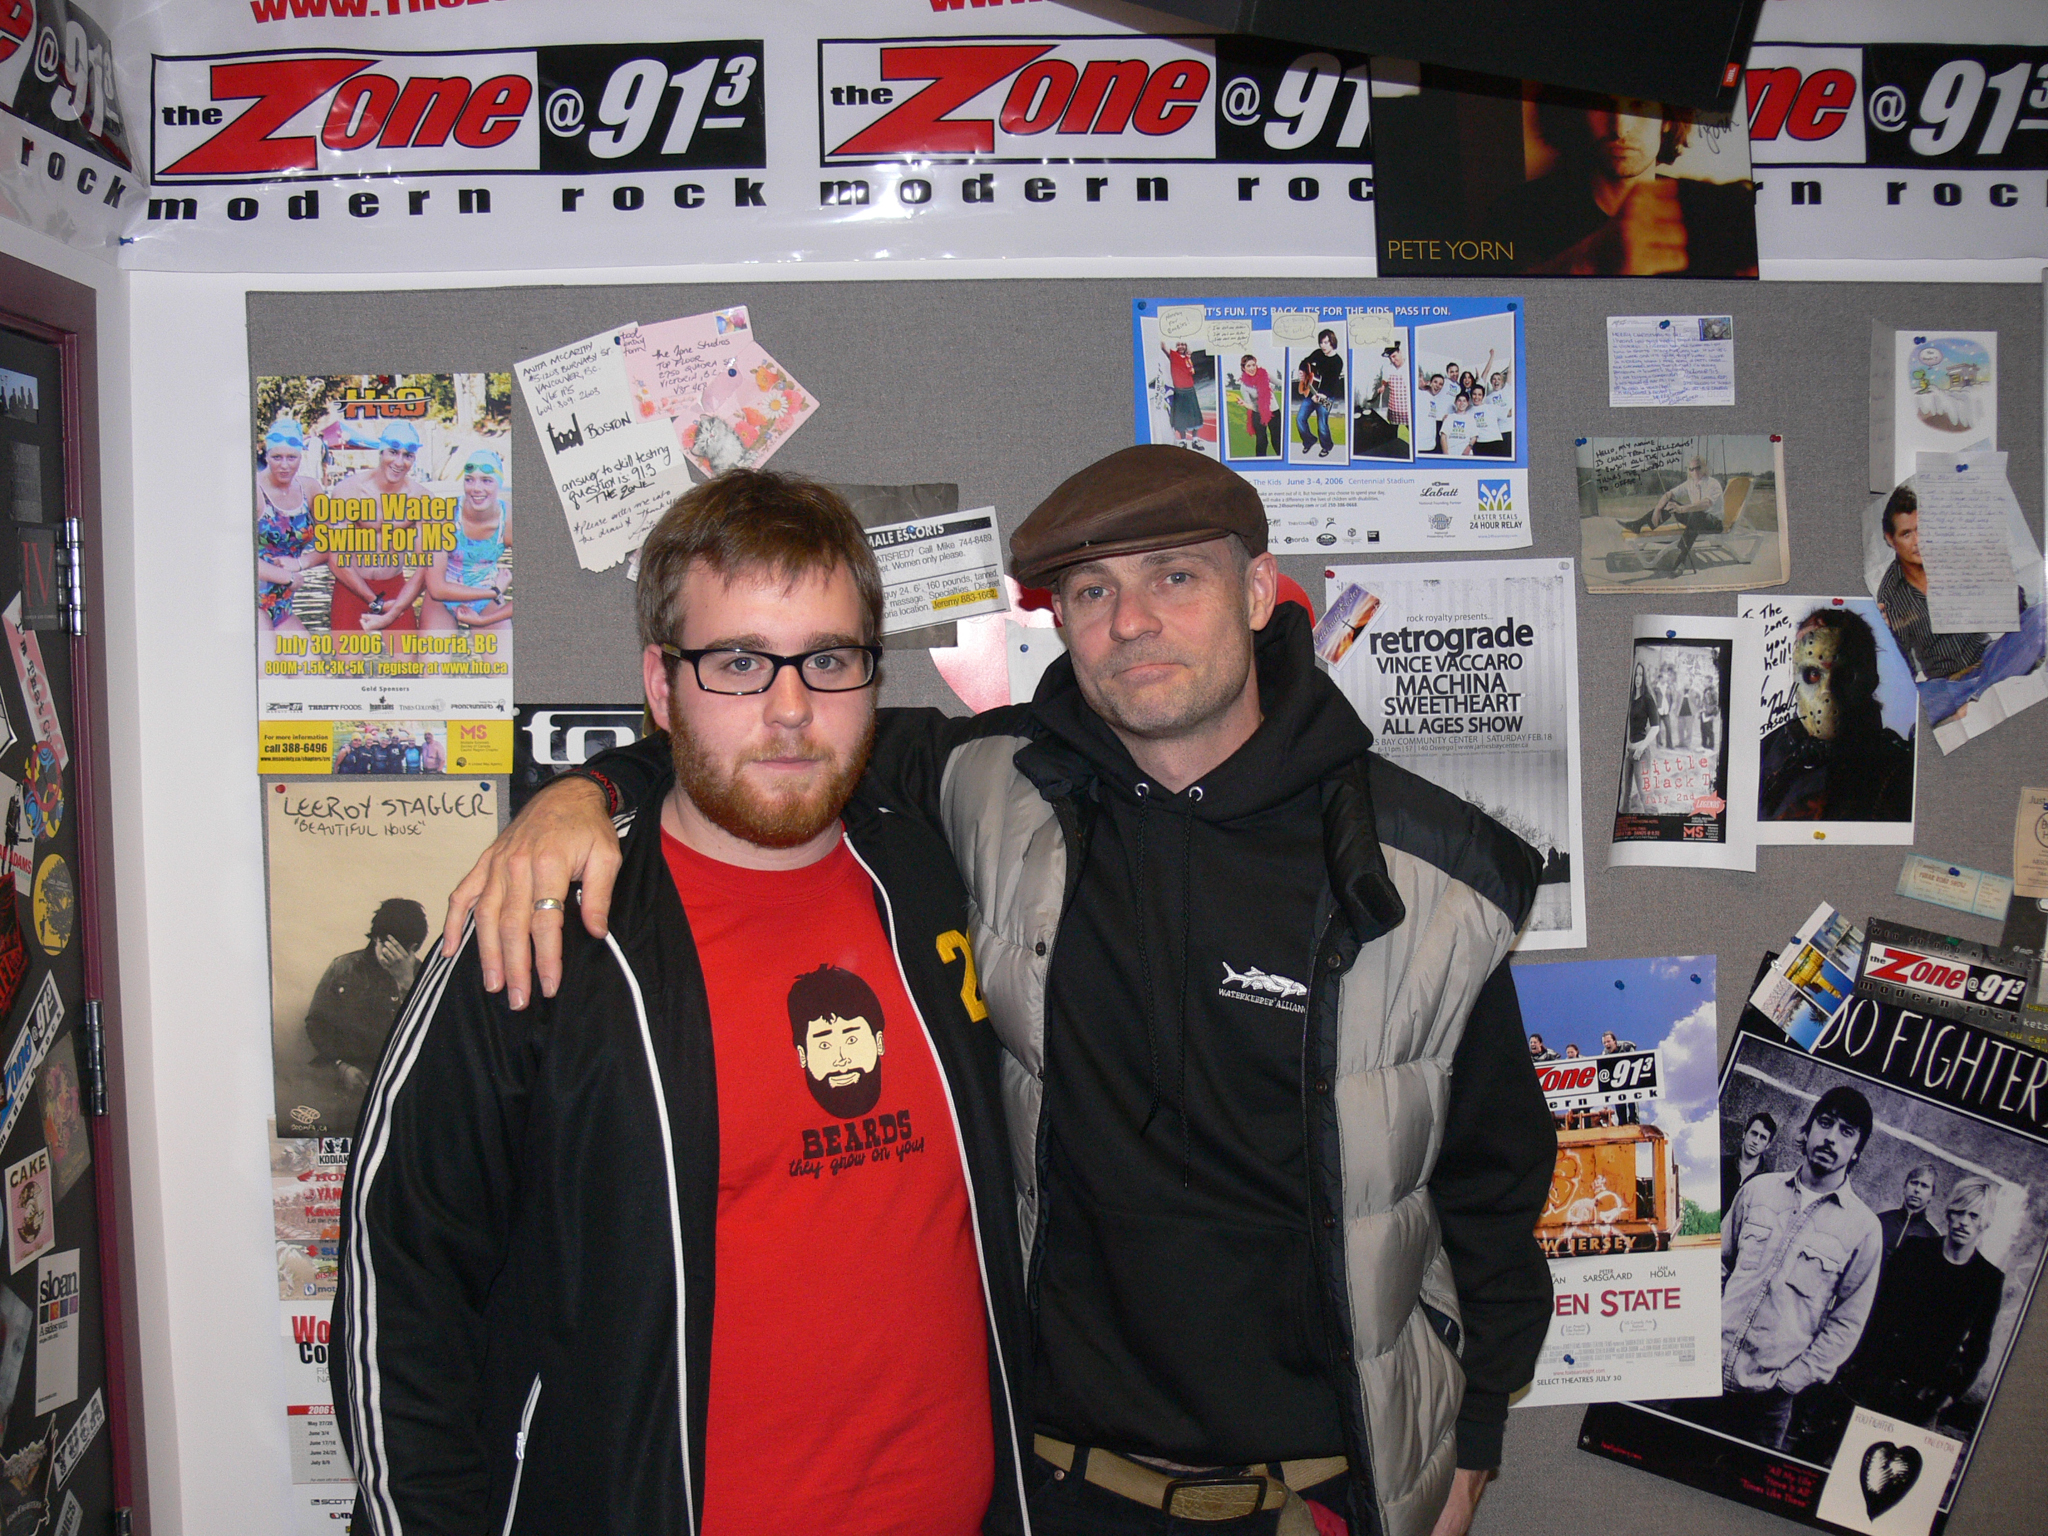 Tyson and Gord Downie in 2007